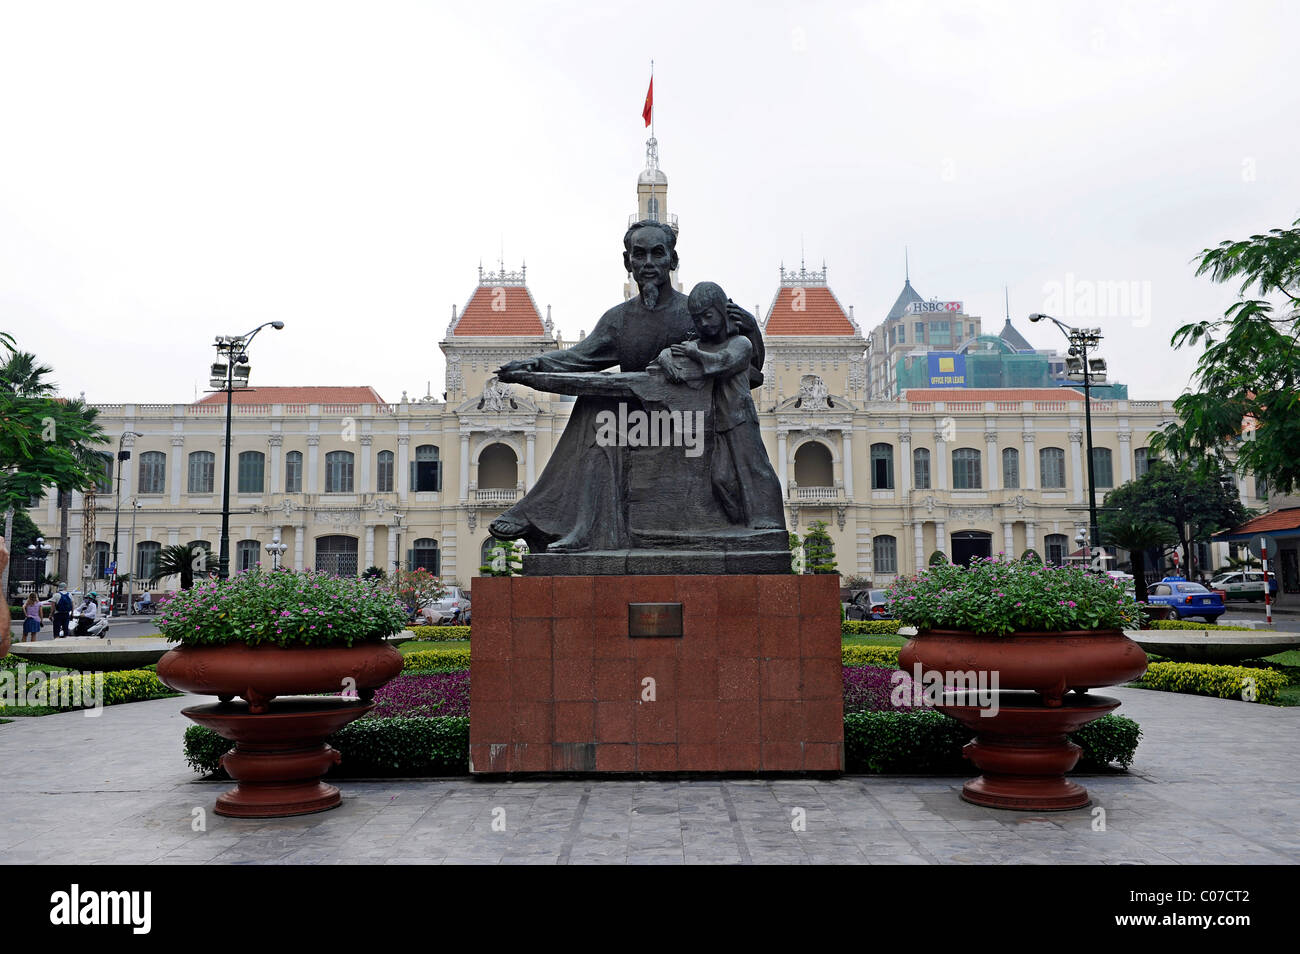 Statue of Ho Chi Minh, Uncle Ho, with a child, in front of the historic City Hall, Ho Chi Minh City, Saigon, South Vietnam Stock Photo